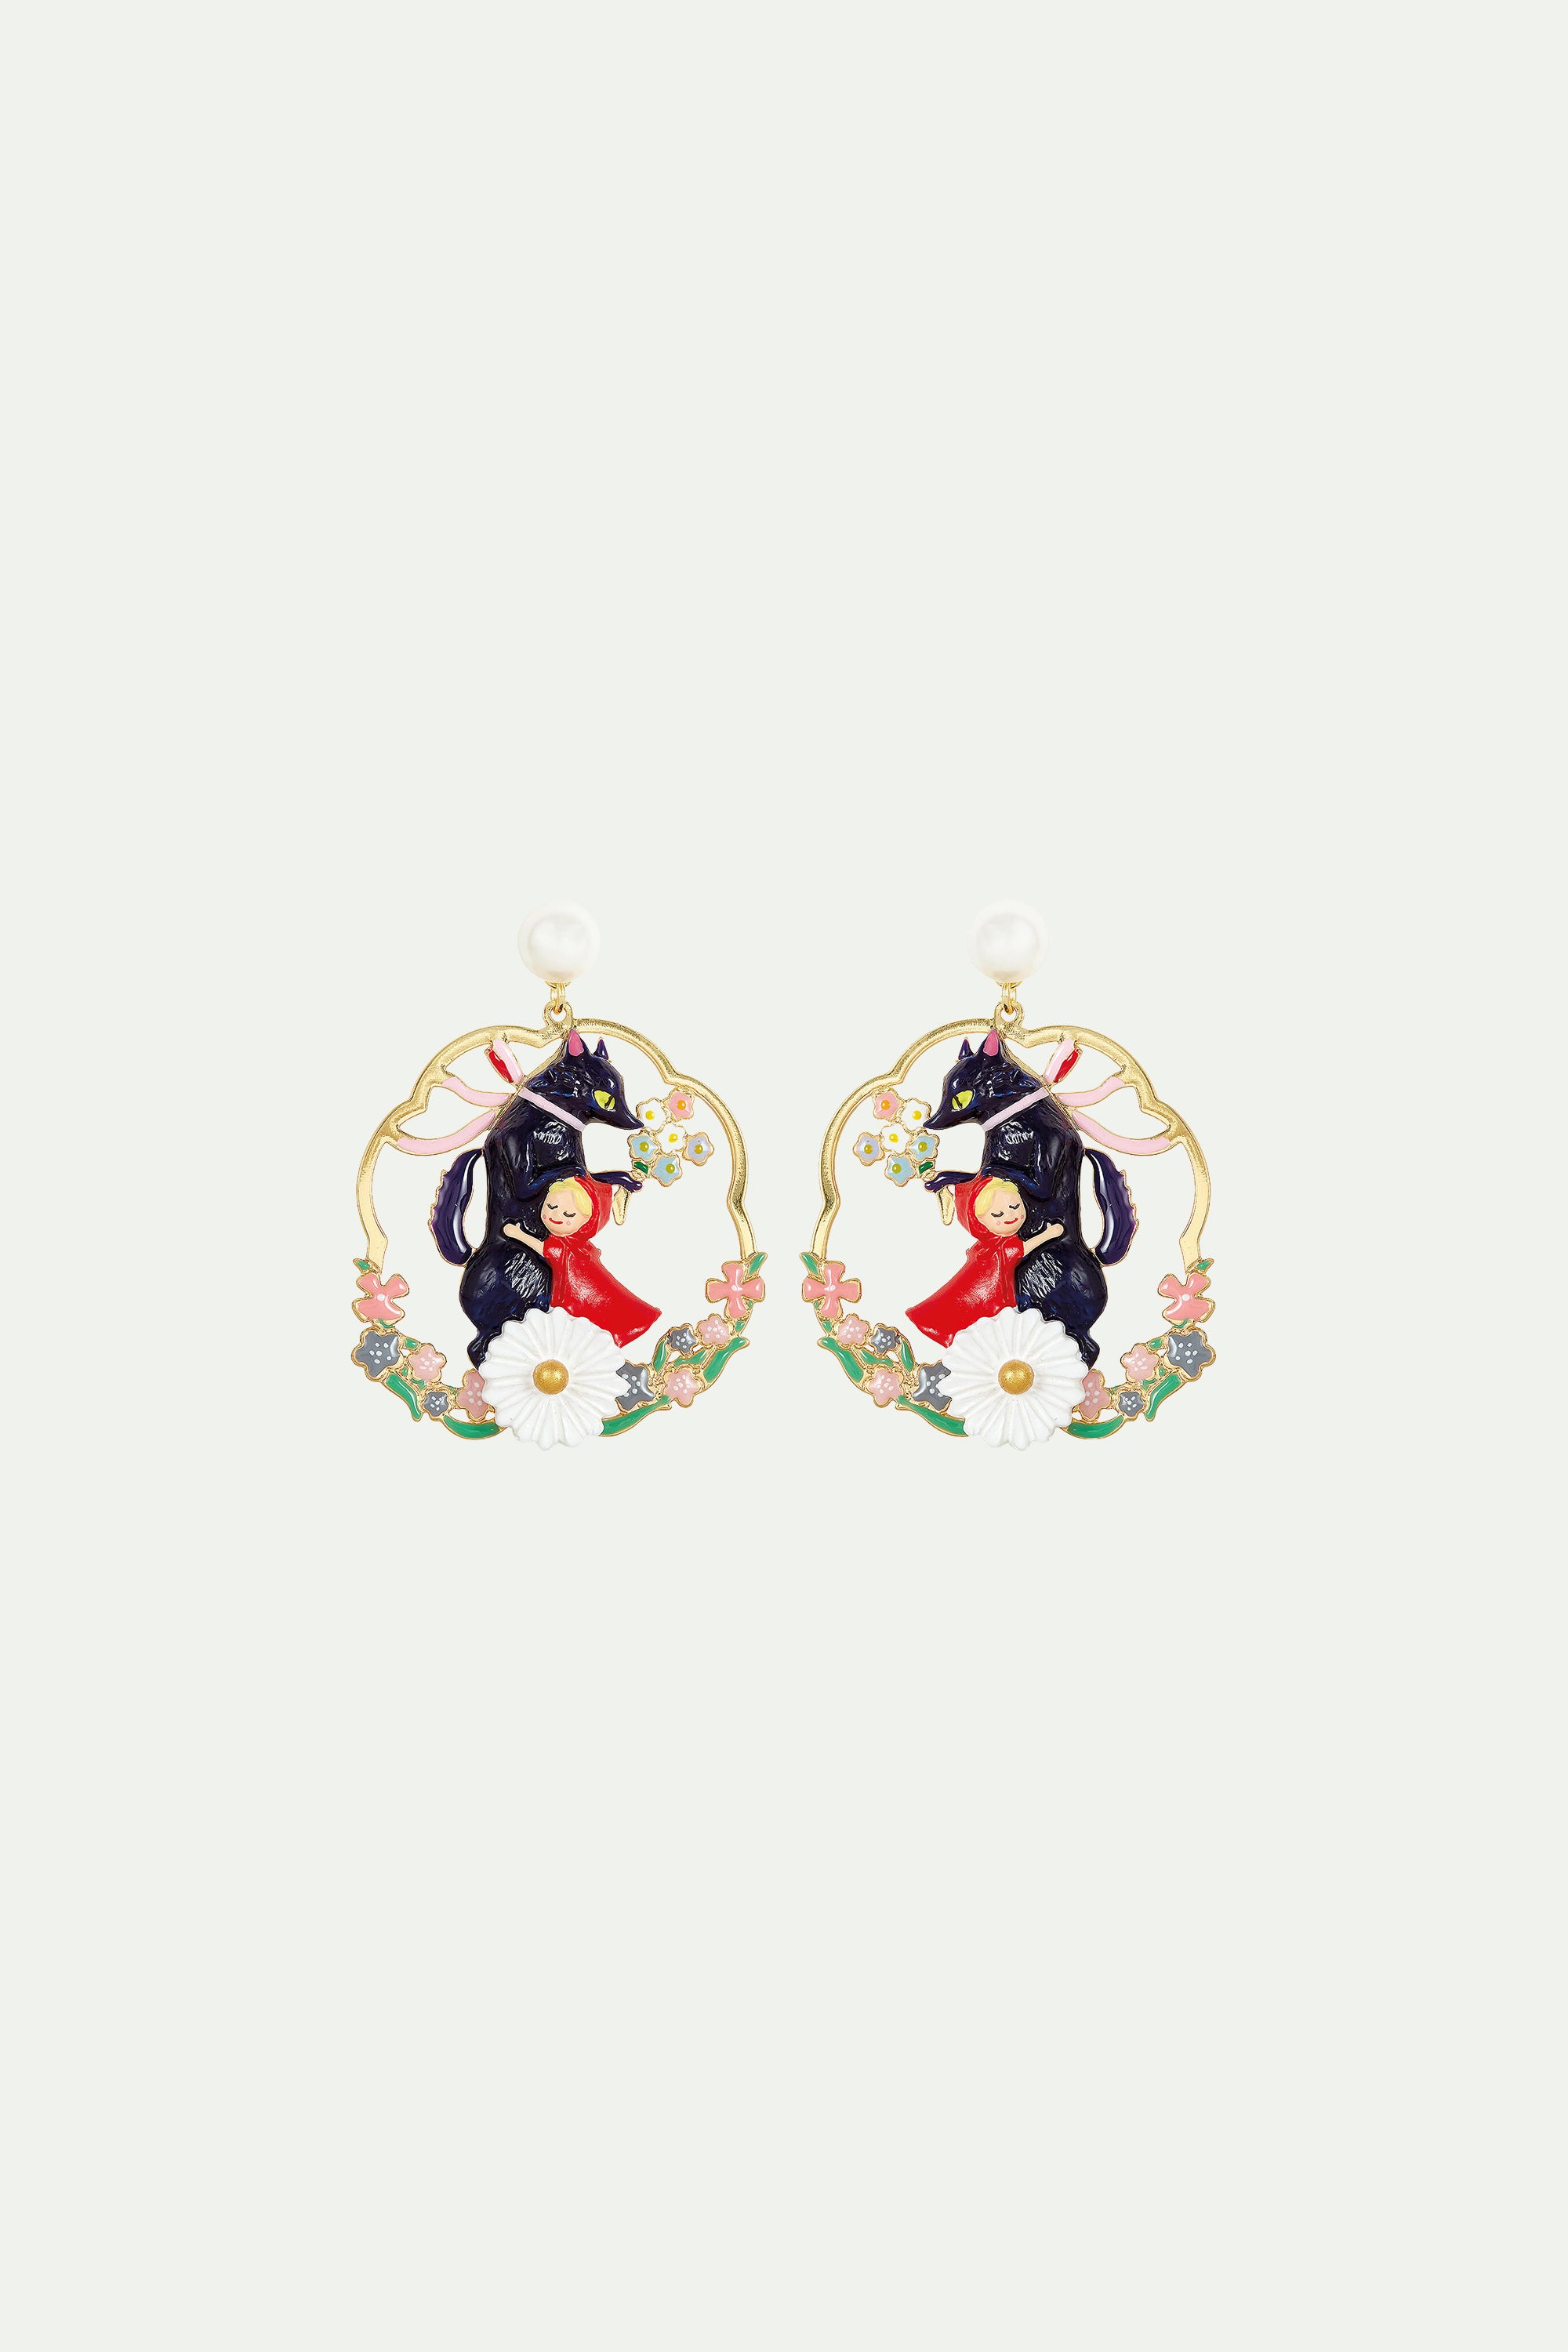 Big Bad Wolf and Little Red Riding Hood clip-on hoop earrings